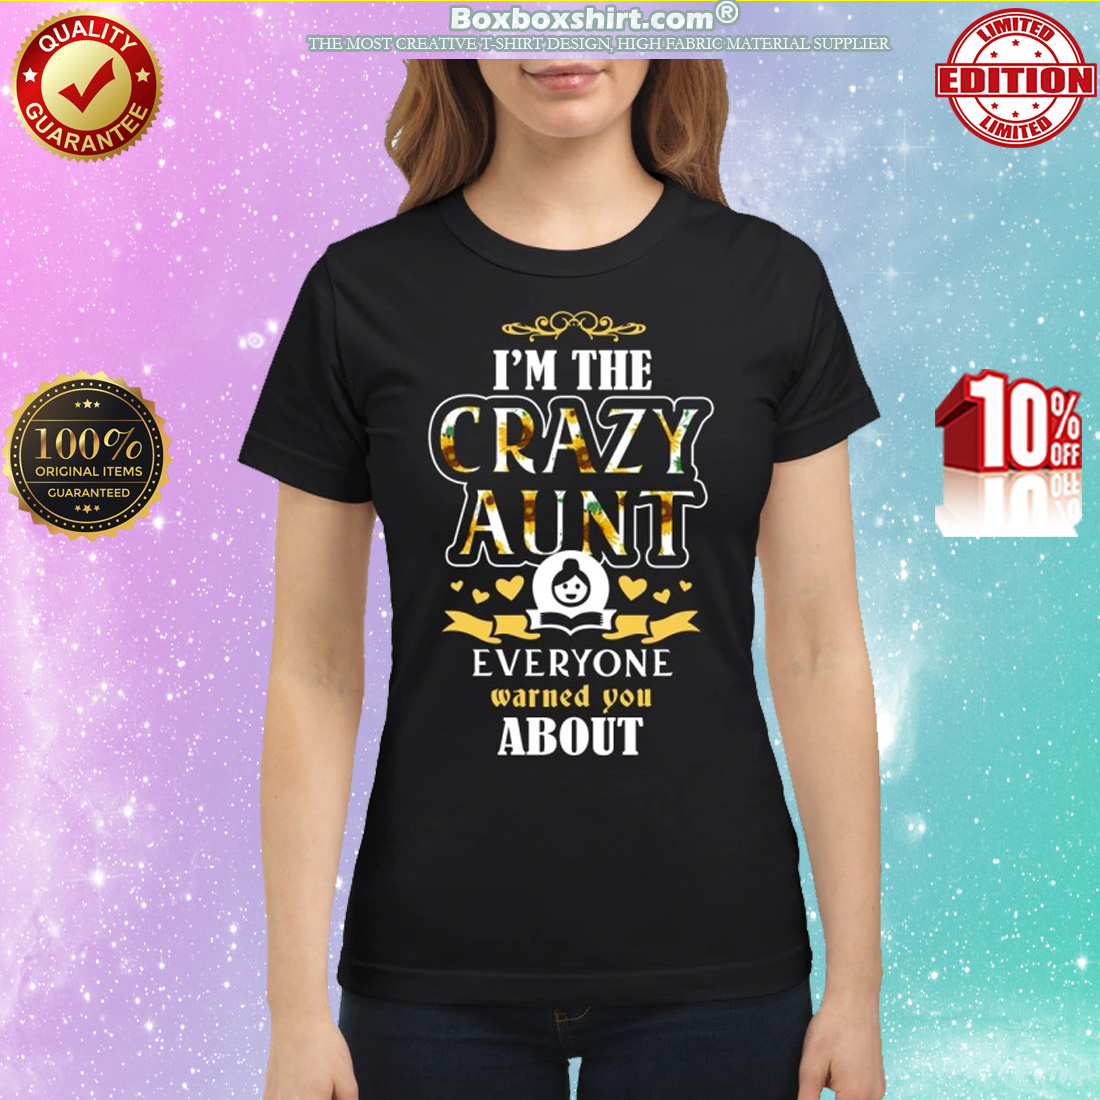 I'm the crazy aunt everyone warned you about classic shirt